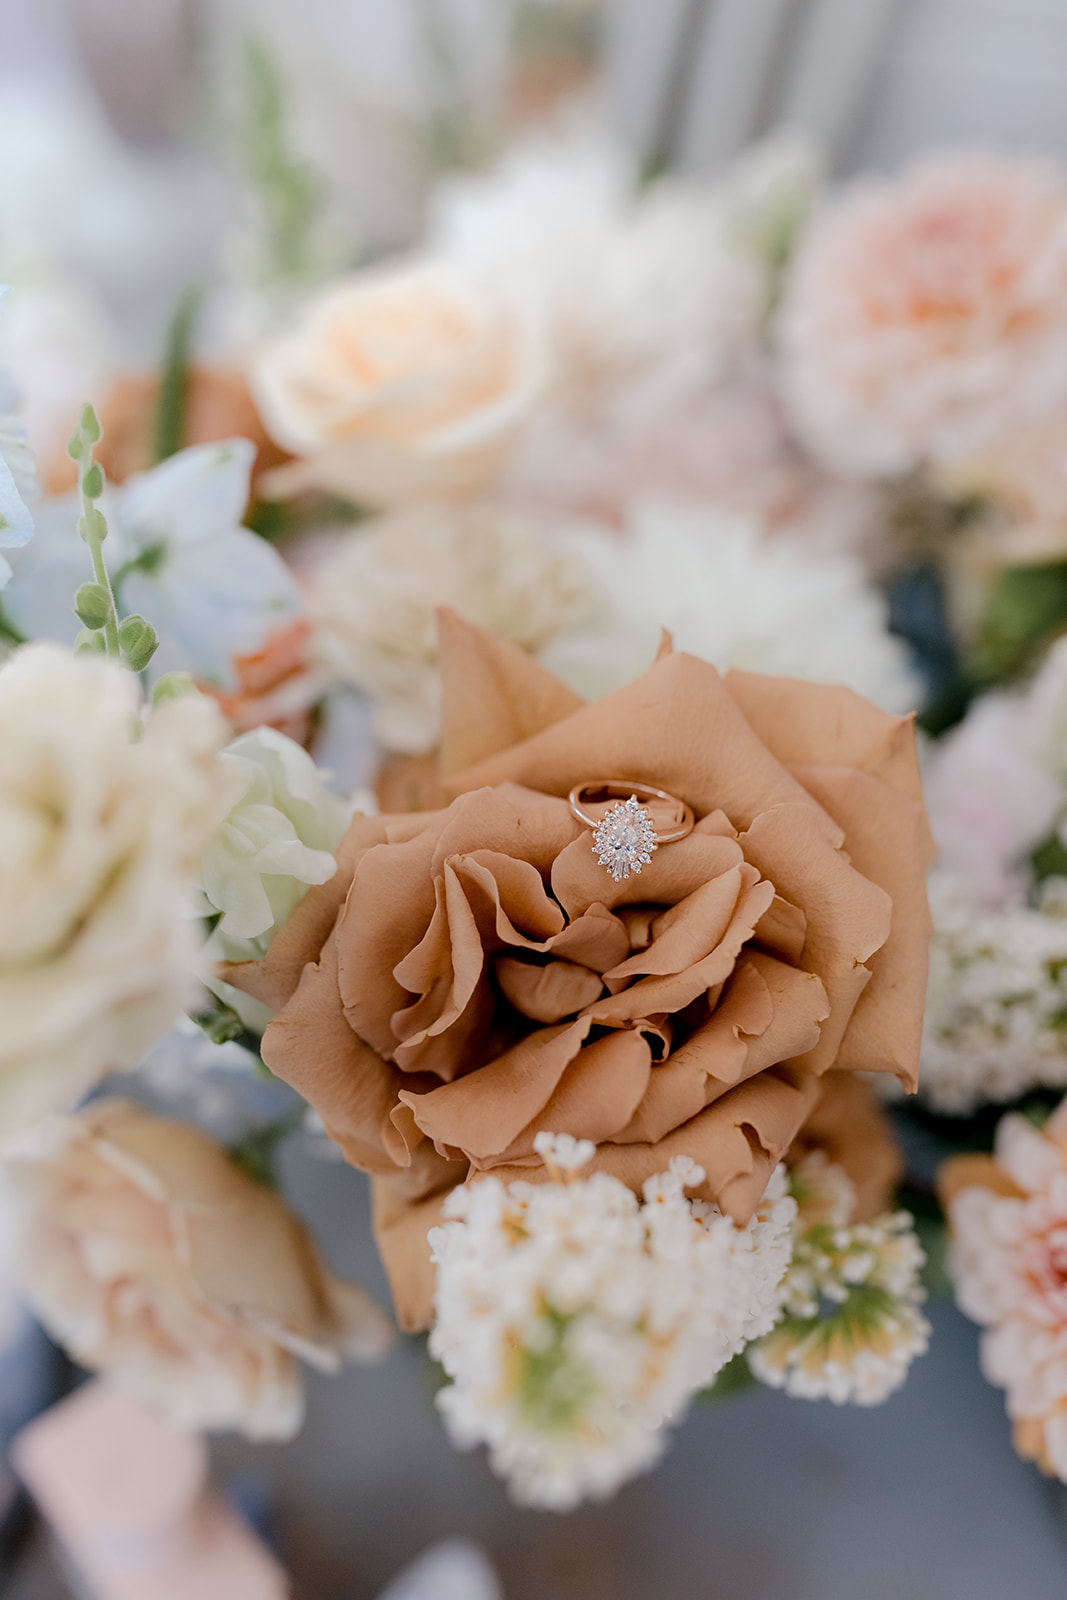 Close-up of engagement ring in bridal bouquet for an elegant country wedding.